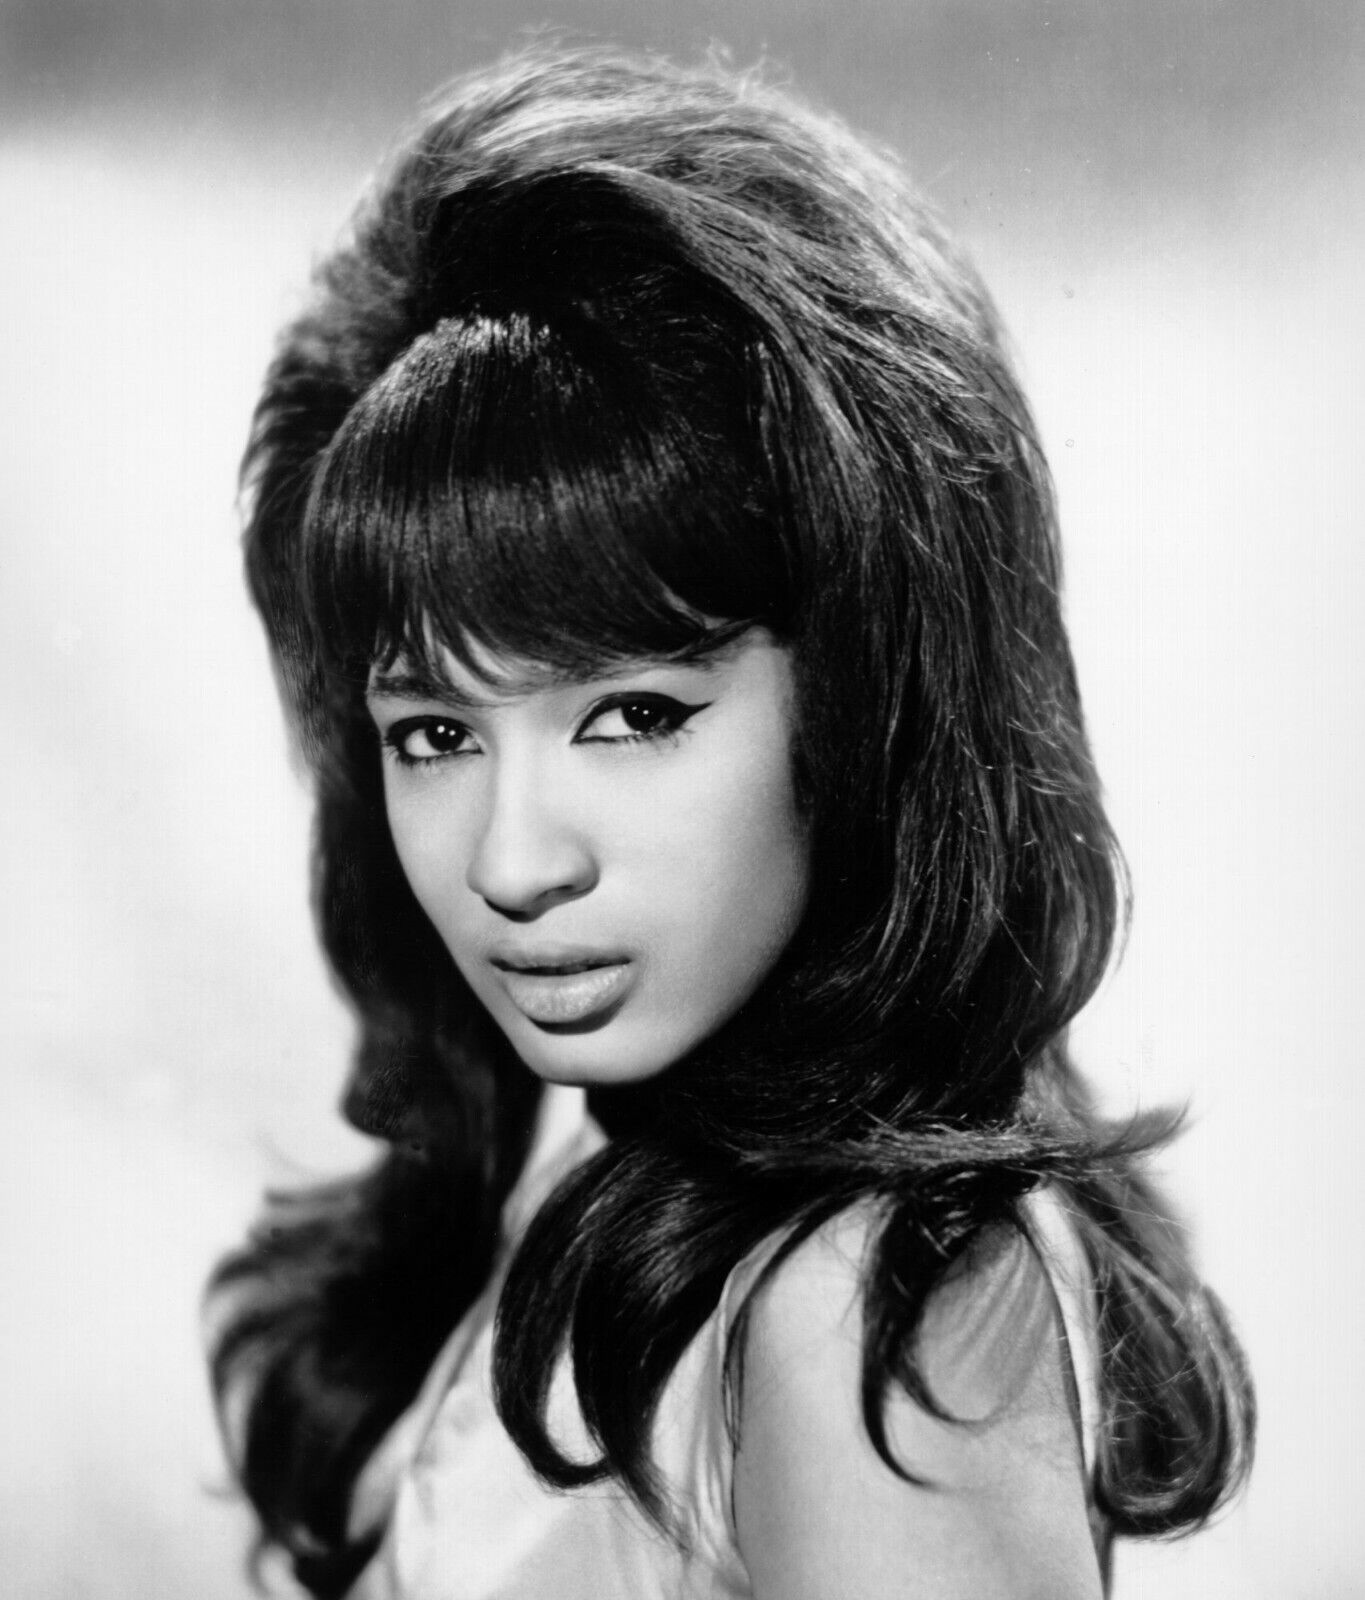 Ronnie Spector and The Ronnettes Set of 5 Glossy Photos 4x6